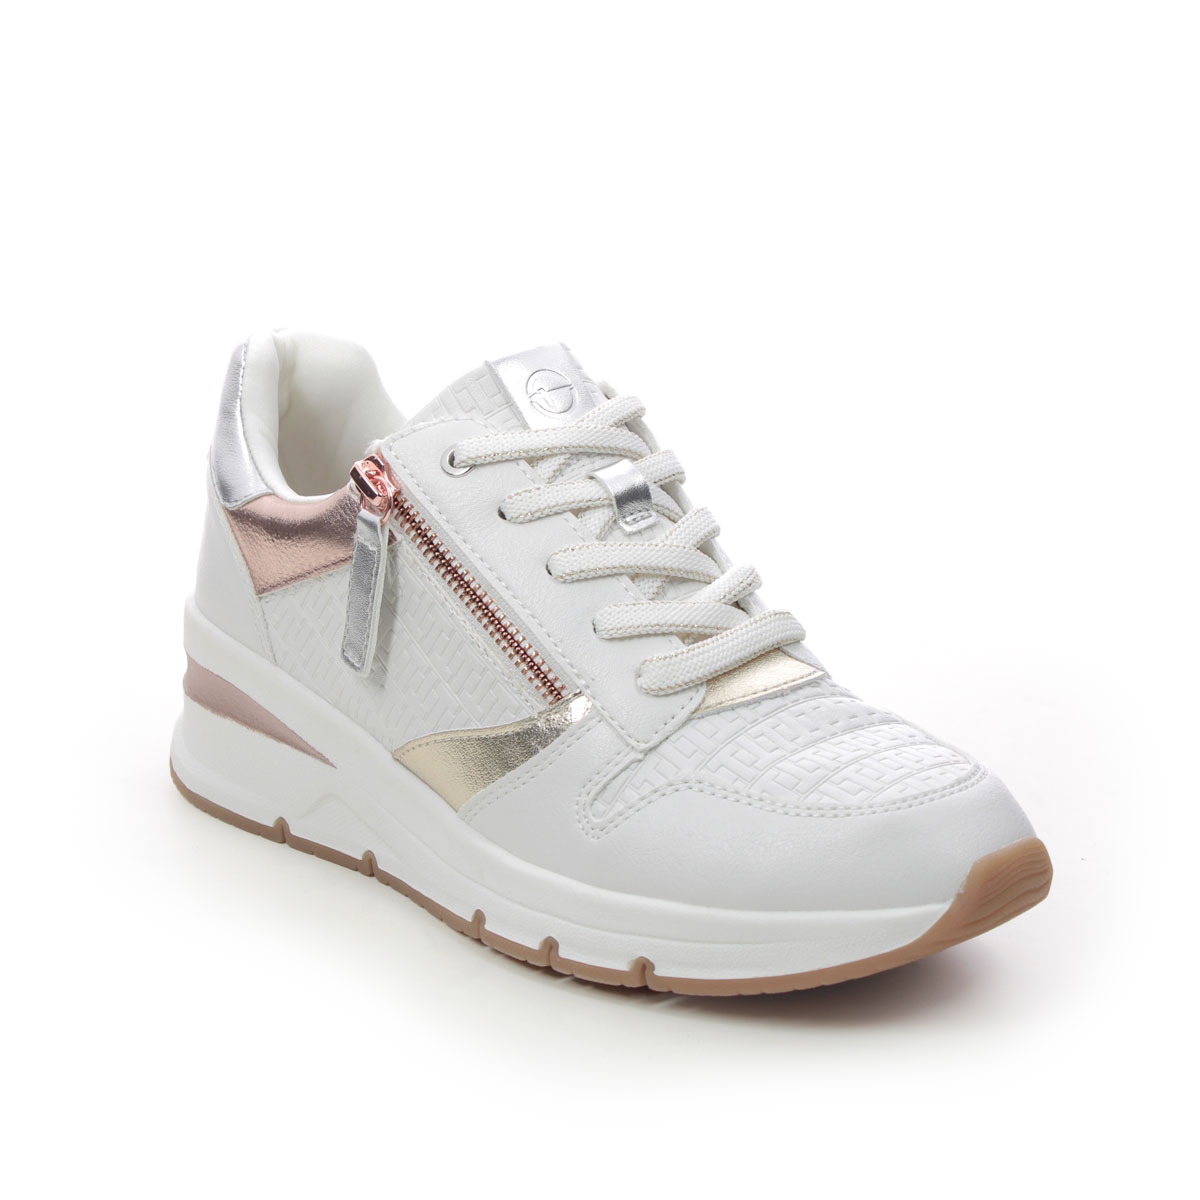 Tamaris Rea Zip Wedge White Rose gold Womens trainers 23702-20-157 in a Plain Man-made in Size 40